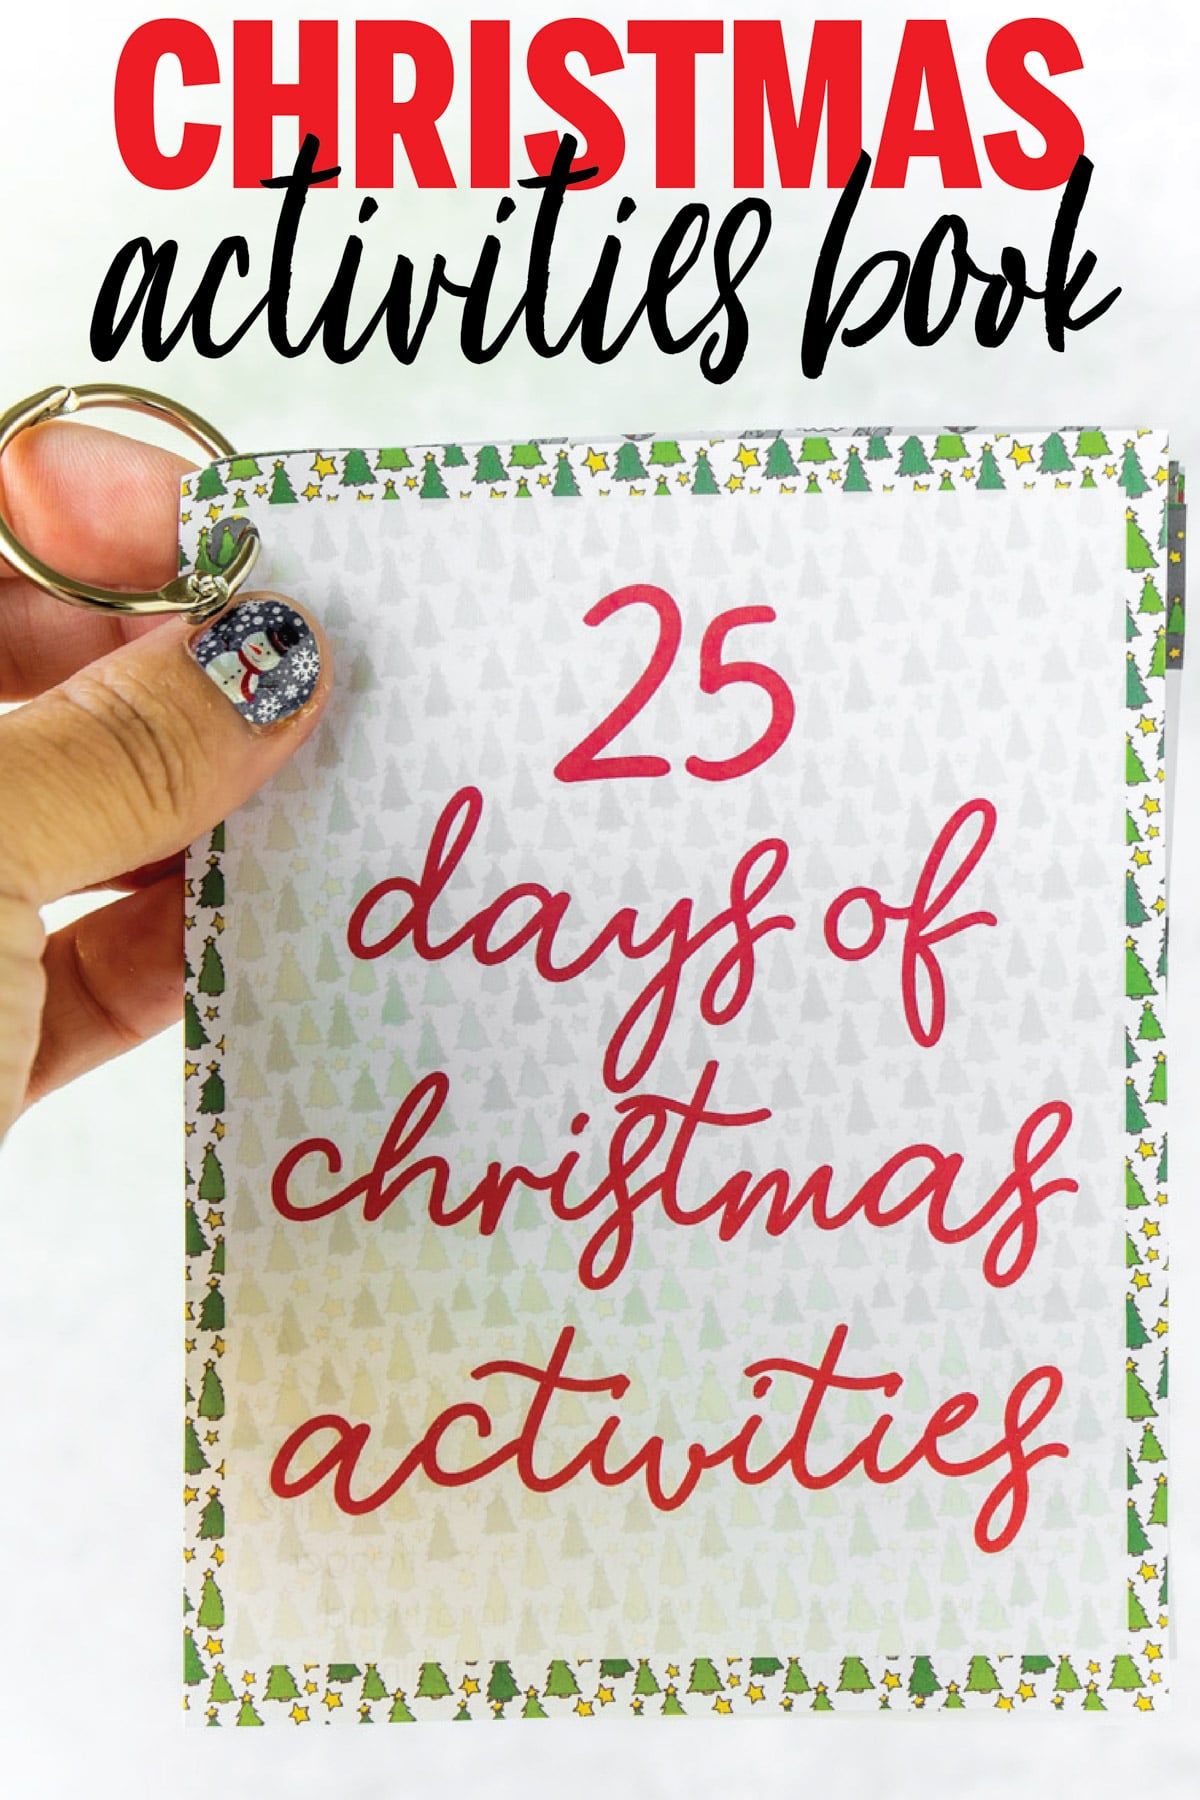 Free printable Christmas activities for families book! Perfect for kids, for teens, and even for adults or couples with no kids! Over 100 fun activities to do during the Christmas season - one to choose each day like a Christmas activities countdown! 